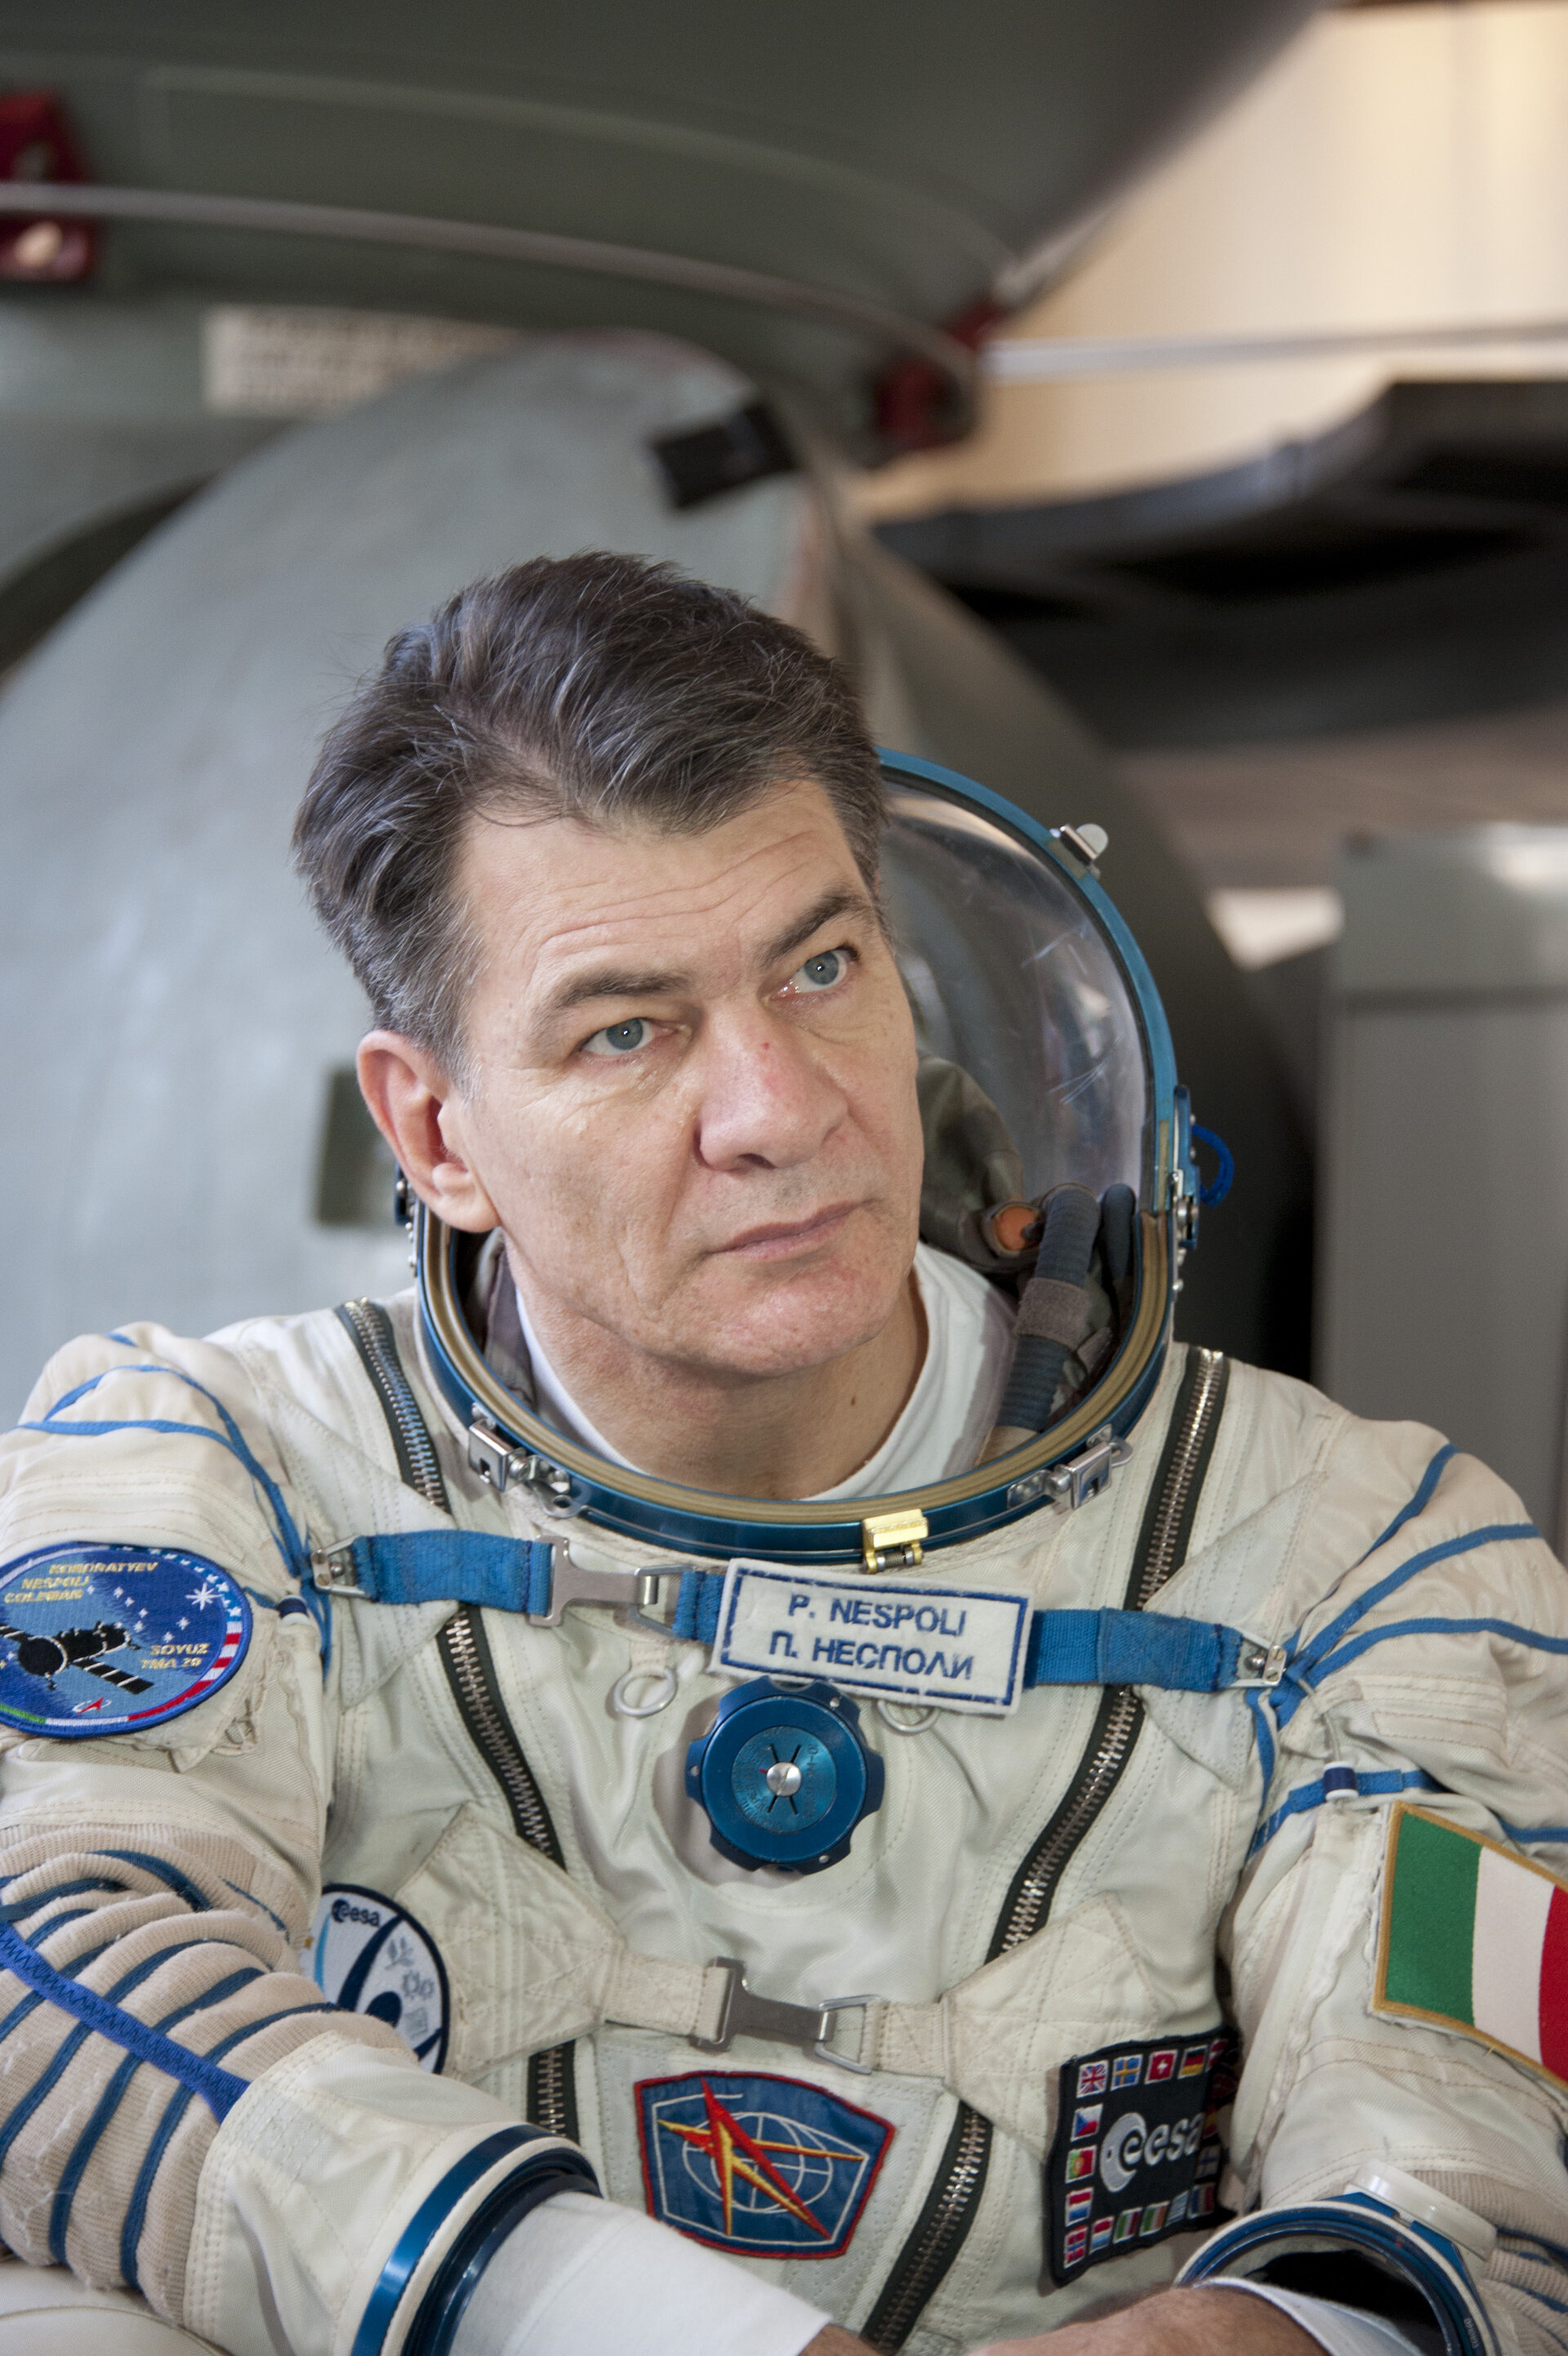 Paolo Nespoli in his Russian Sokol suit